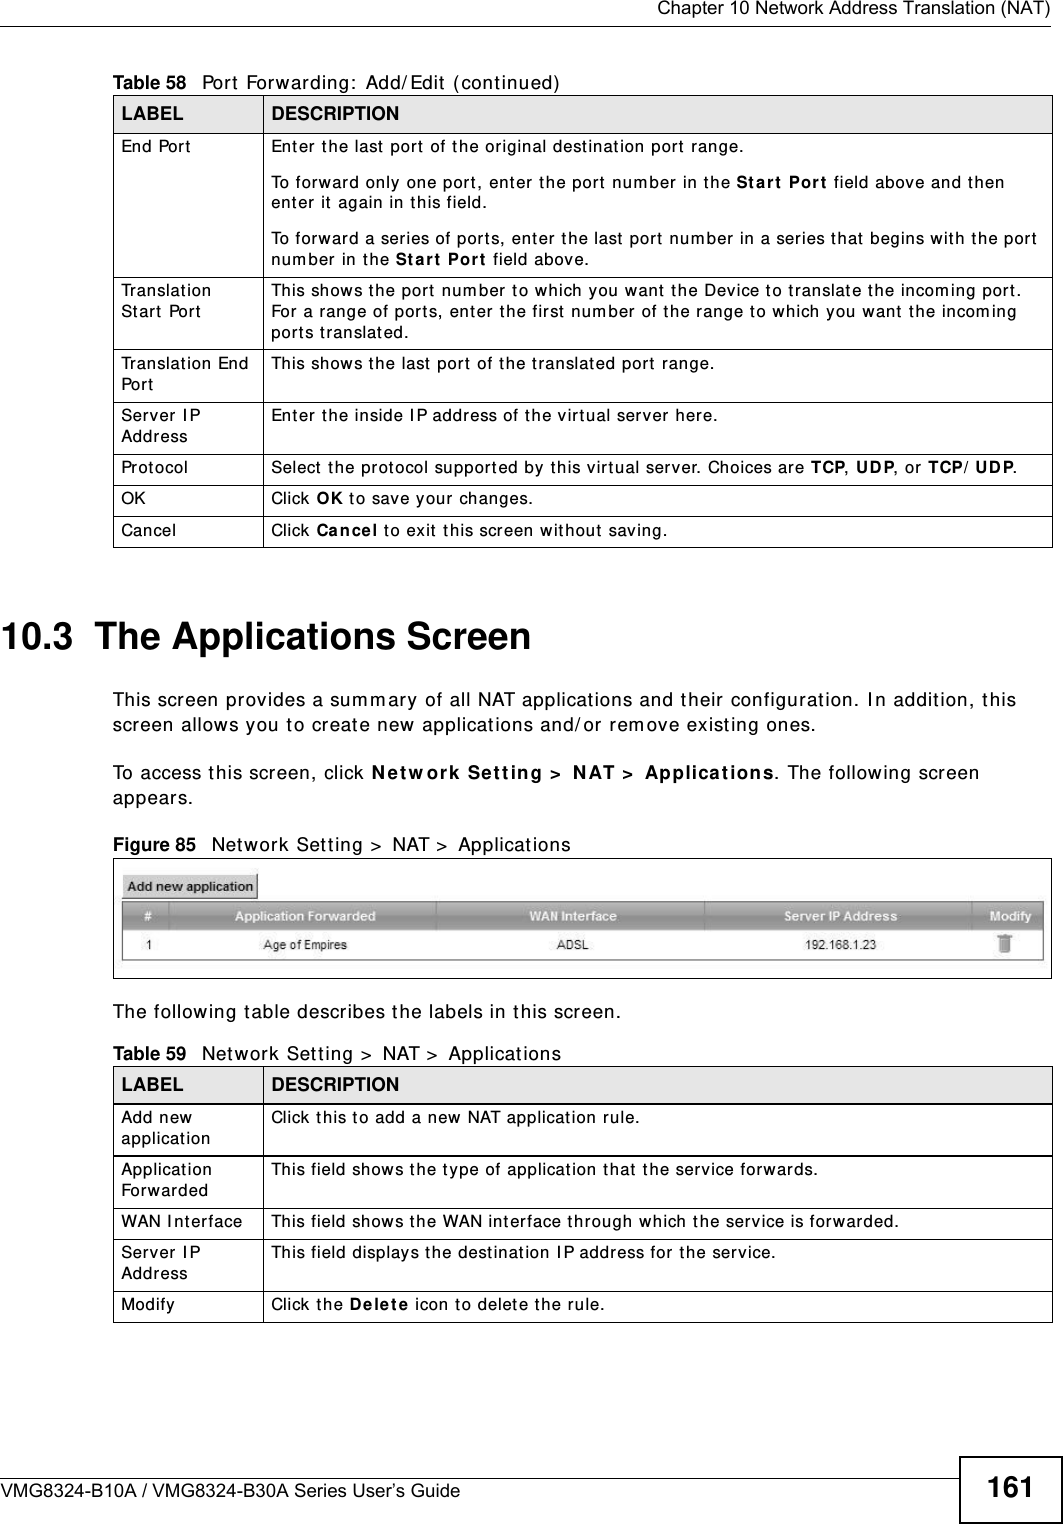  Chapter 10 Network Address Translation (NAT)VMG8324-B10A / VMG8324-B30A Series User’s Guide 16110.3  The Applications ScreenThis screen provides a sum m ary of all NAT applications and t heir configurat ion. I n addition, this screen allows you t o creat e new applicat ions and/ or rem ove existing ones.To access t his screen, click N e t w or k Se t t ing &gt;  N AT &gt;  Applica t ion s. The following screen appears.Figure 85   Net work Set t ing &gt;  NAT &gt;  ApplicationsThe following t able describes t he labels in this screen. End Port  Enter t he last port  of t he original dest ination port  range. To forward only one port , ent er  the port  num ber in t he St a rt  Port  field above and t hen enter it  again in this field. To forward a ser ies of port s, ent er t he last  port  num ber in a ser ies t hat  begins w it h t he por t  num ber in the St a rt  Por t  field above.Tr an sl a t i on  St art  PortThis show s the por t  num ber to which you want t he Dev ice t o t ranslat e t he incom ing port. For a range of port s, ent er t he fir st  num ber of the range t o w hich you want  t he incom ing port s translat ed.Tr a n s l a t i o n  En d  Port  This shows t he last port  of t he t ranslated port range.Server I P AddressEnt er t he inside I P address of the virt ual server here.Prot ocol Select the pr ot ocol support ed by this virtual ser ver. Choices are TCP, UD P, or TCP/ UDP.OK Click OK to save your changes.Cancel Click Ca nce l t o exit  t his screen w it hout saving.Table 58   Port  Forwar ding:  Add/ Edit ( cont inued)LABEL DESCRIPTIONTable 59   Net work Sett ing &gt;  NAT &gt;  Applicat ionsLABEL DESCRIPTIONAdd new applicat ionClick t his t o add a new NAT applicat ion rule.Applicat ion ForwardedThis field shows t he t ype of application t hat  t he service for wards.WAN I nt erface This field shows the WAN interface through which the service is forwarded.Server I P AddressThis field displays the dest ination I P address for t he service.Modify Click t he D e let e  icon t o delet e t he rule.